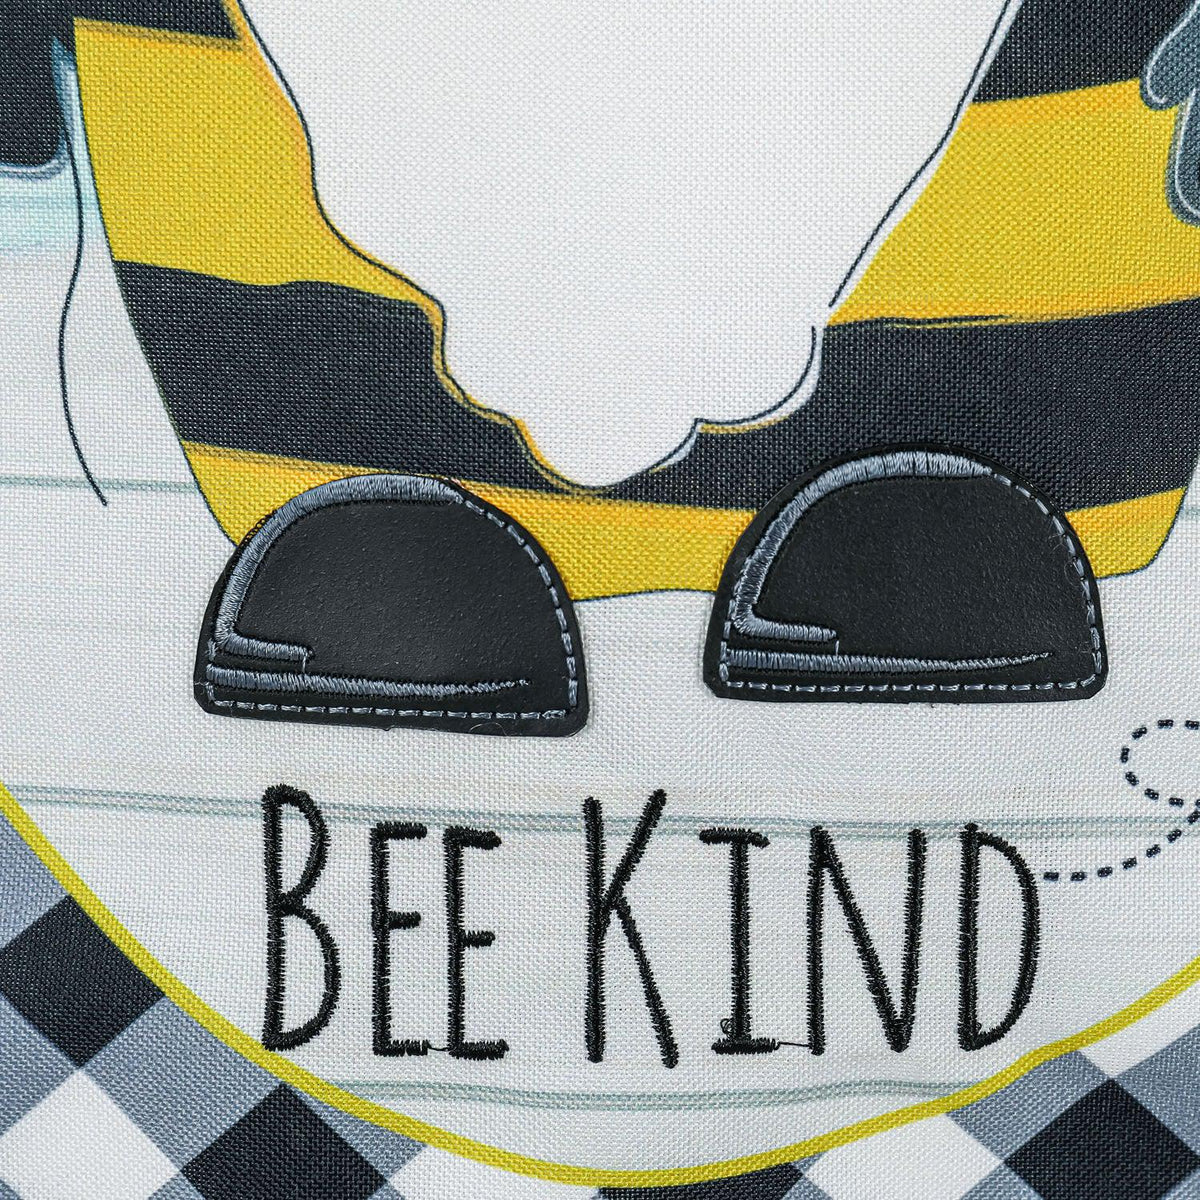 The Bee Humble Bee Kind Gnome garden flag features a gnome in a bee costume, a black checked border, and the words "Bee Humble Bee Kind".